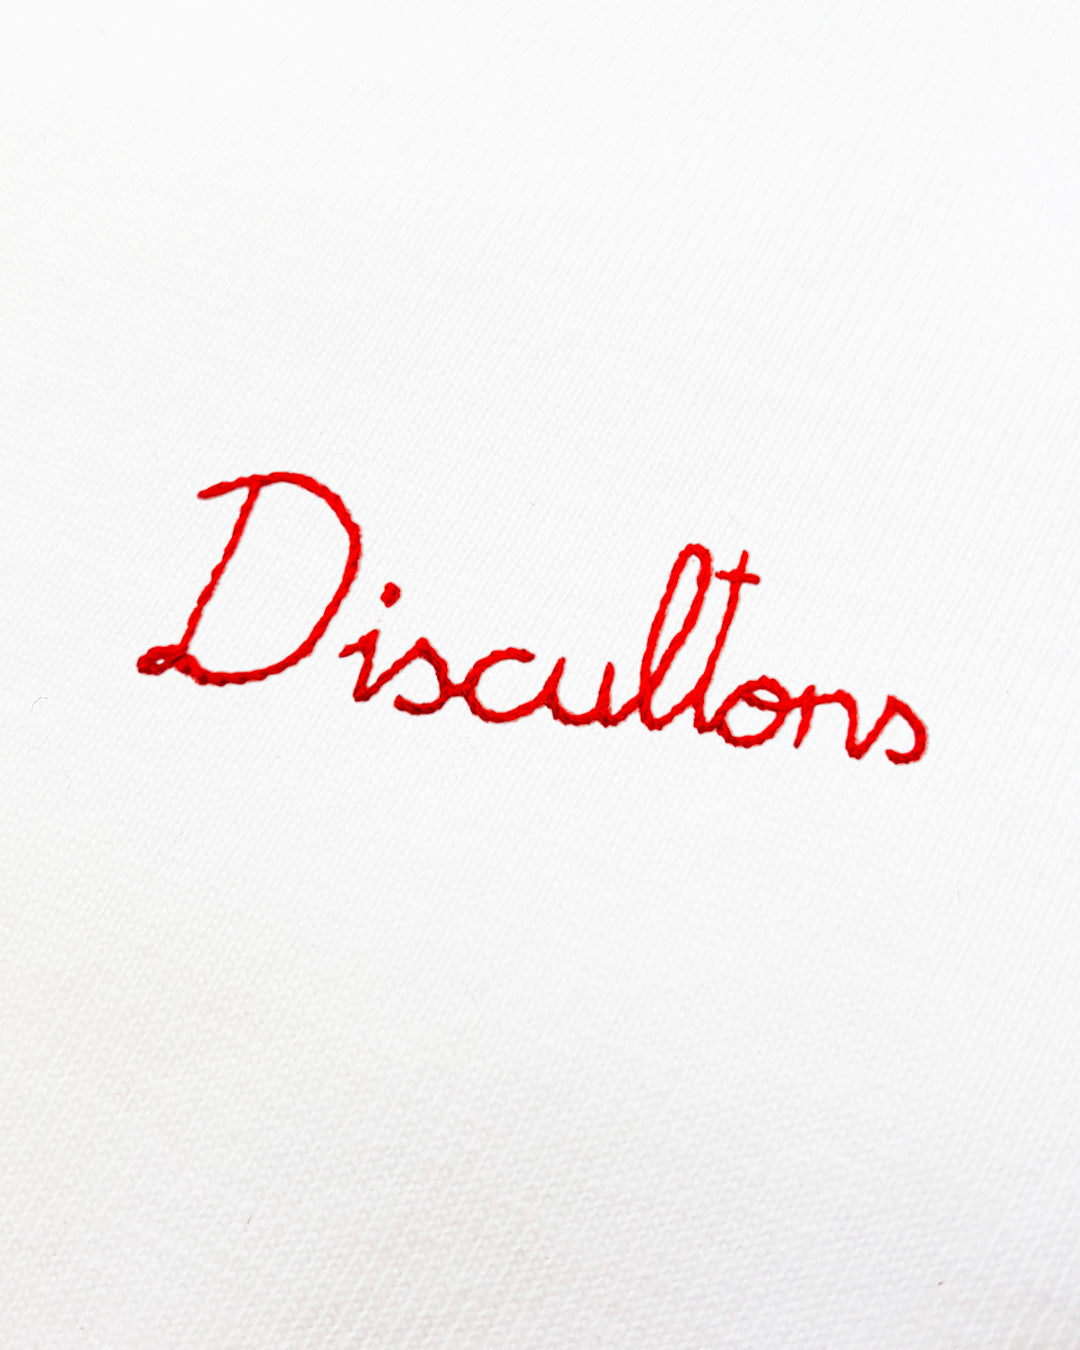 Hand Embroidered Slogan in Red - Discultons- on White T-Shirt